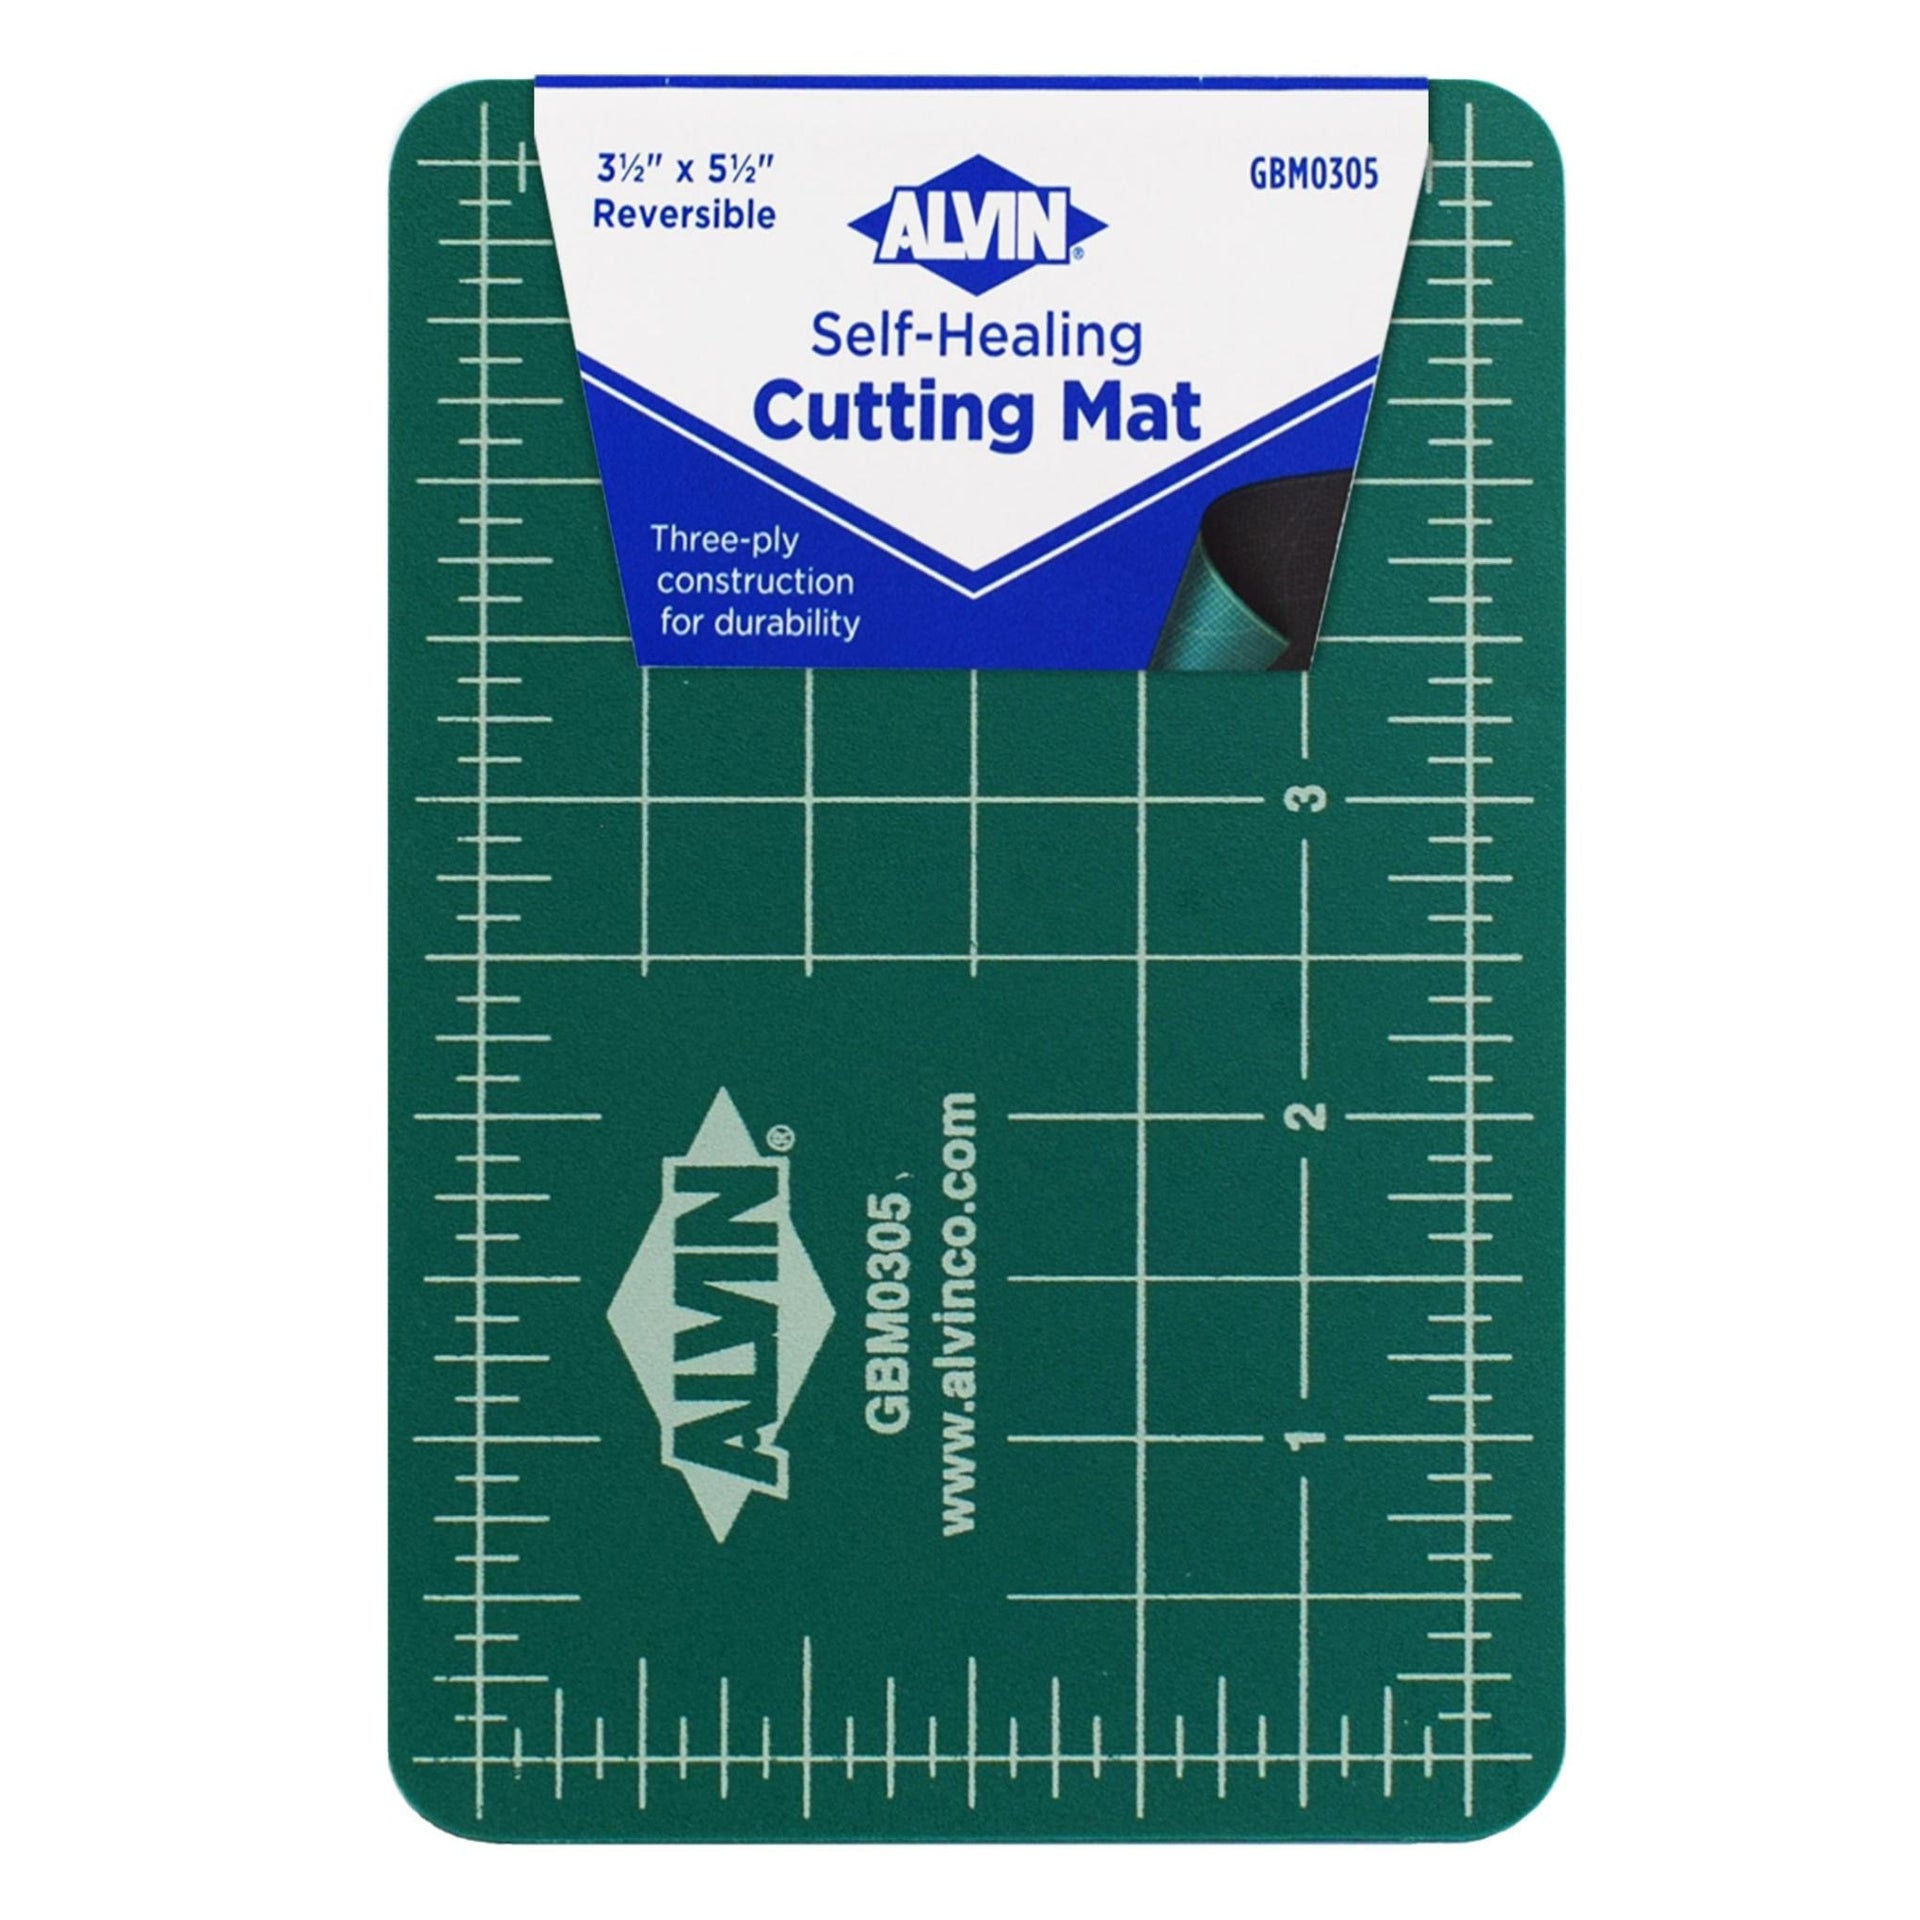 Alvin GBM2436 GBM Series 24 inches x 36 inches Green/Black Professional  Self-Healing Cutting Mat - Stitched with friends